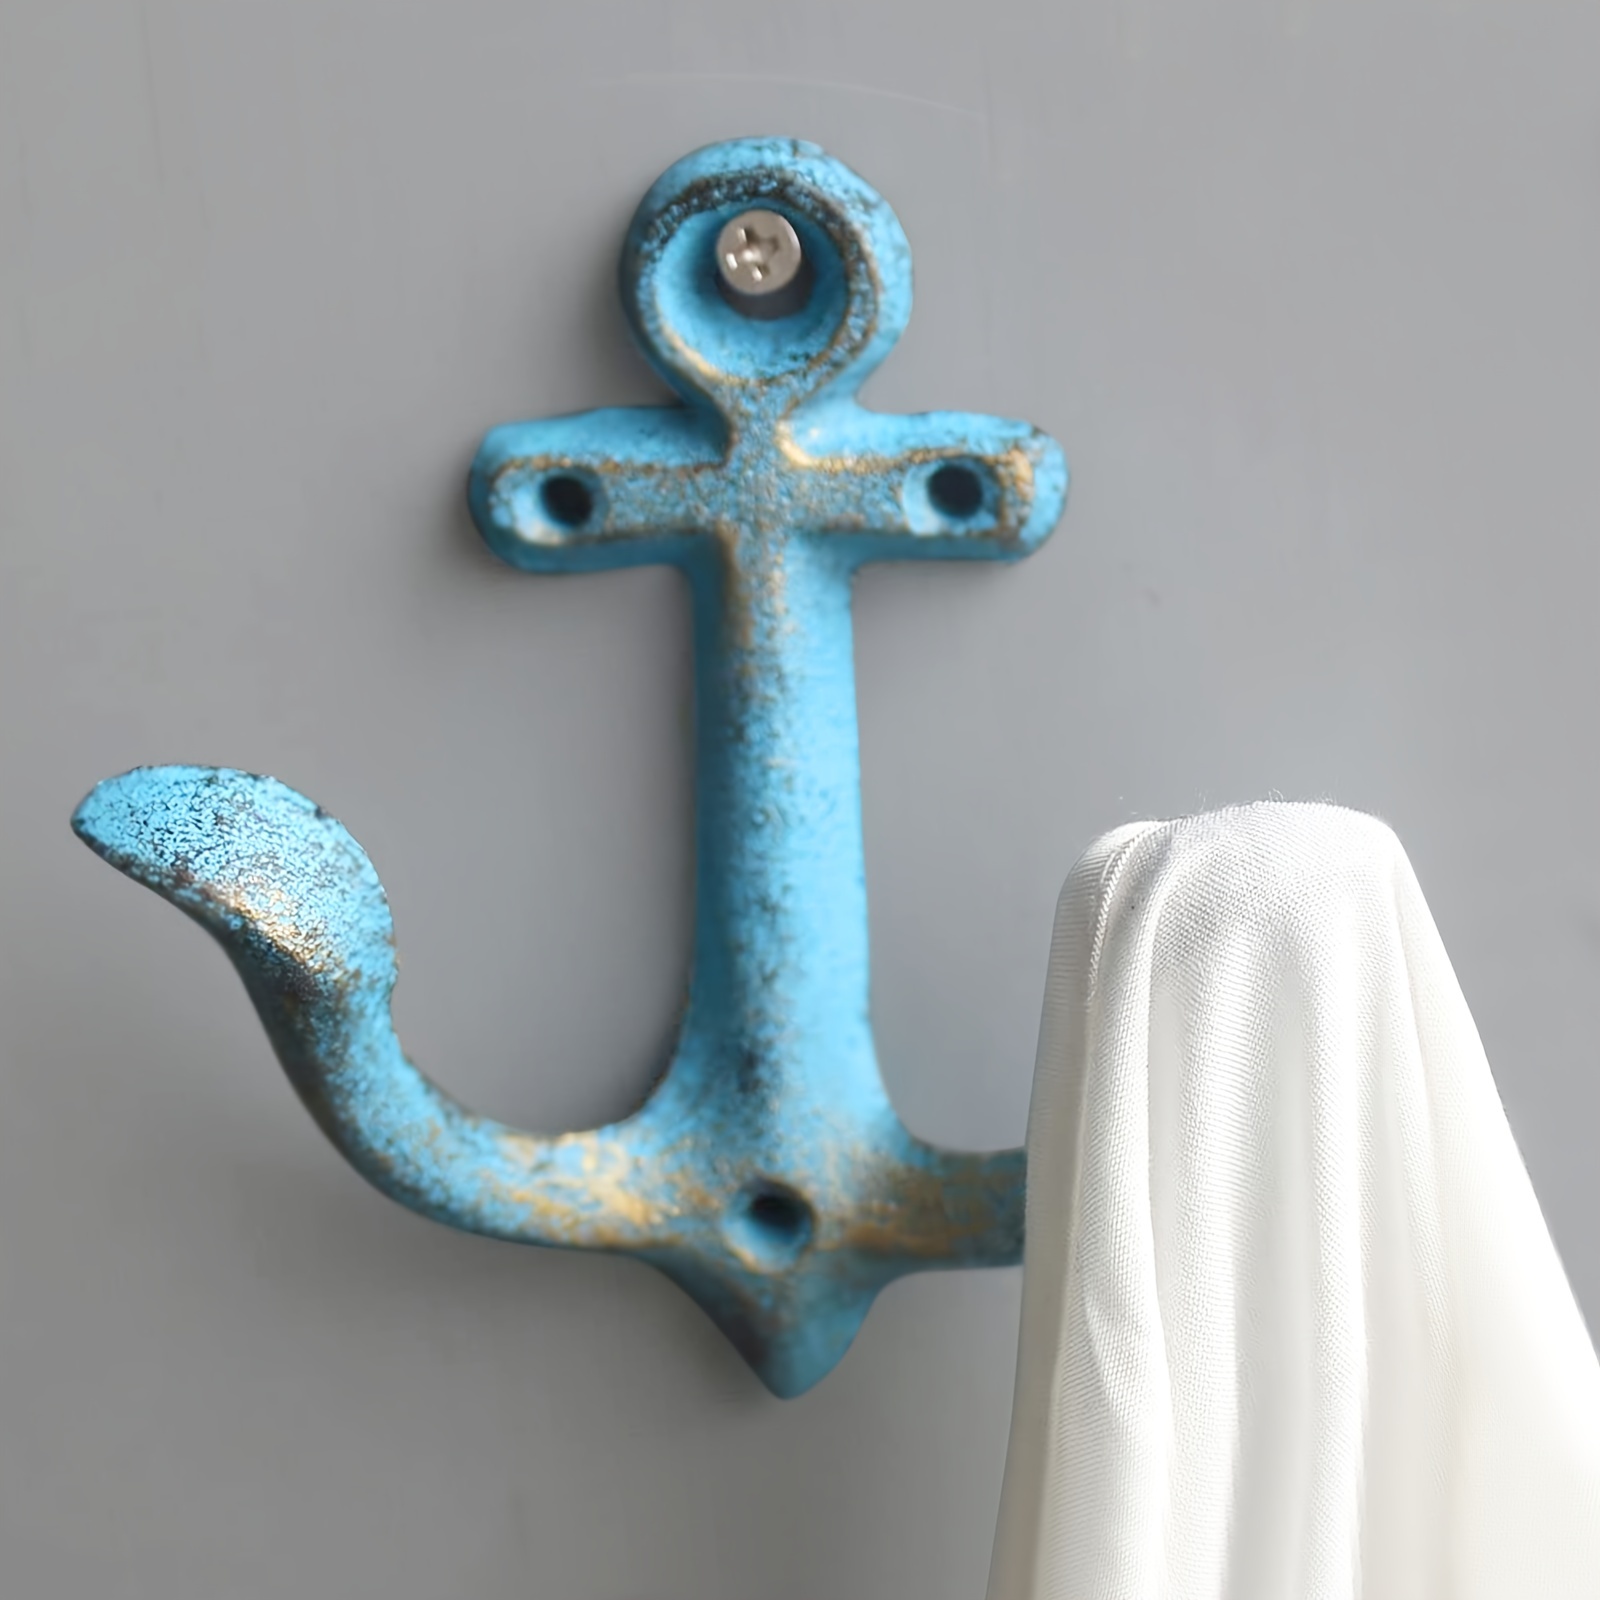 1pc, Vintage Rustic Cast Iron Nautical Anchor Design Wall Hooks Coat Hooks  Rack, Decorative Wall Mounted Antique Shabby Chic Metal Home Bathroom Towel